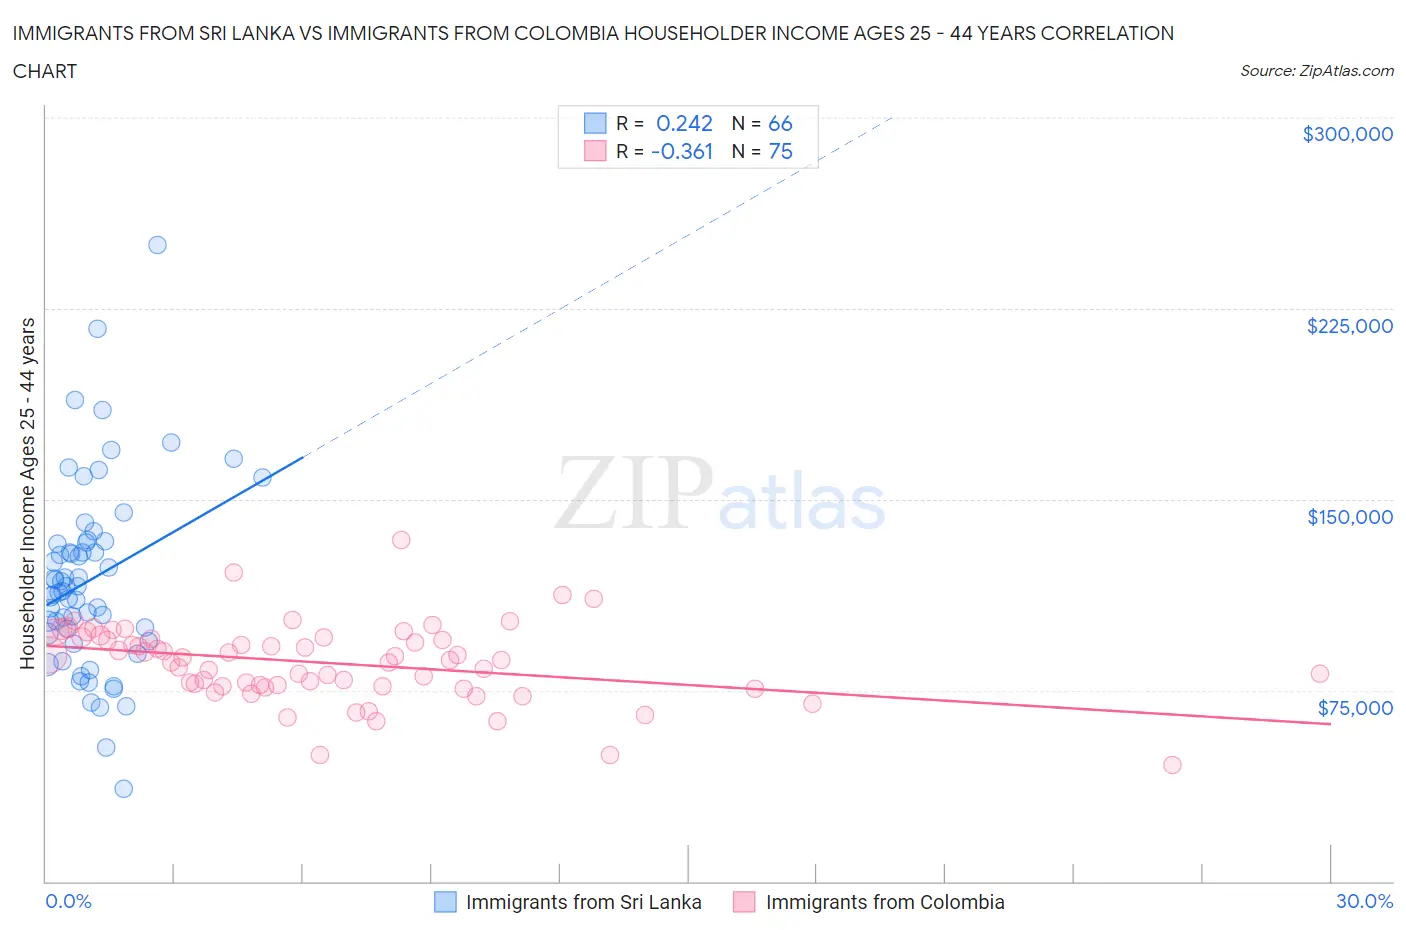 Immigrants from Sri Lanka vs Immigrants from Colombia Householder Income Ages 25 - 44 years